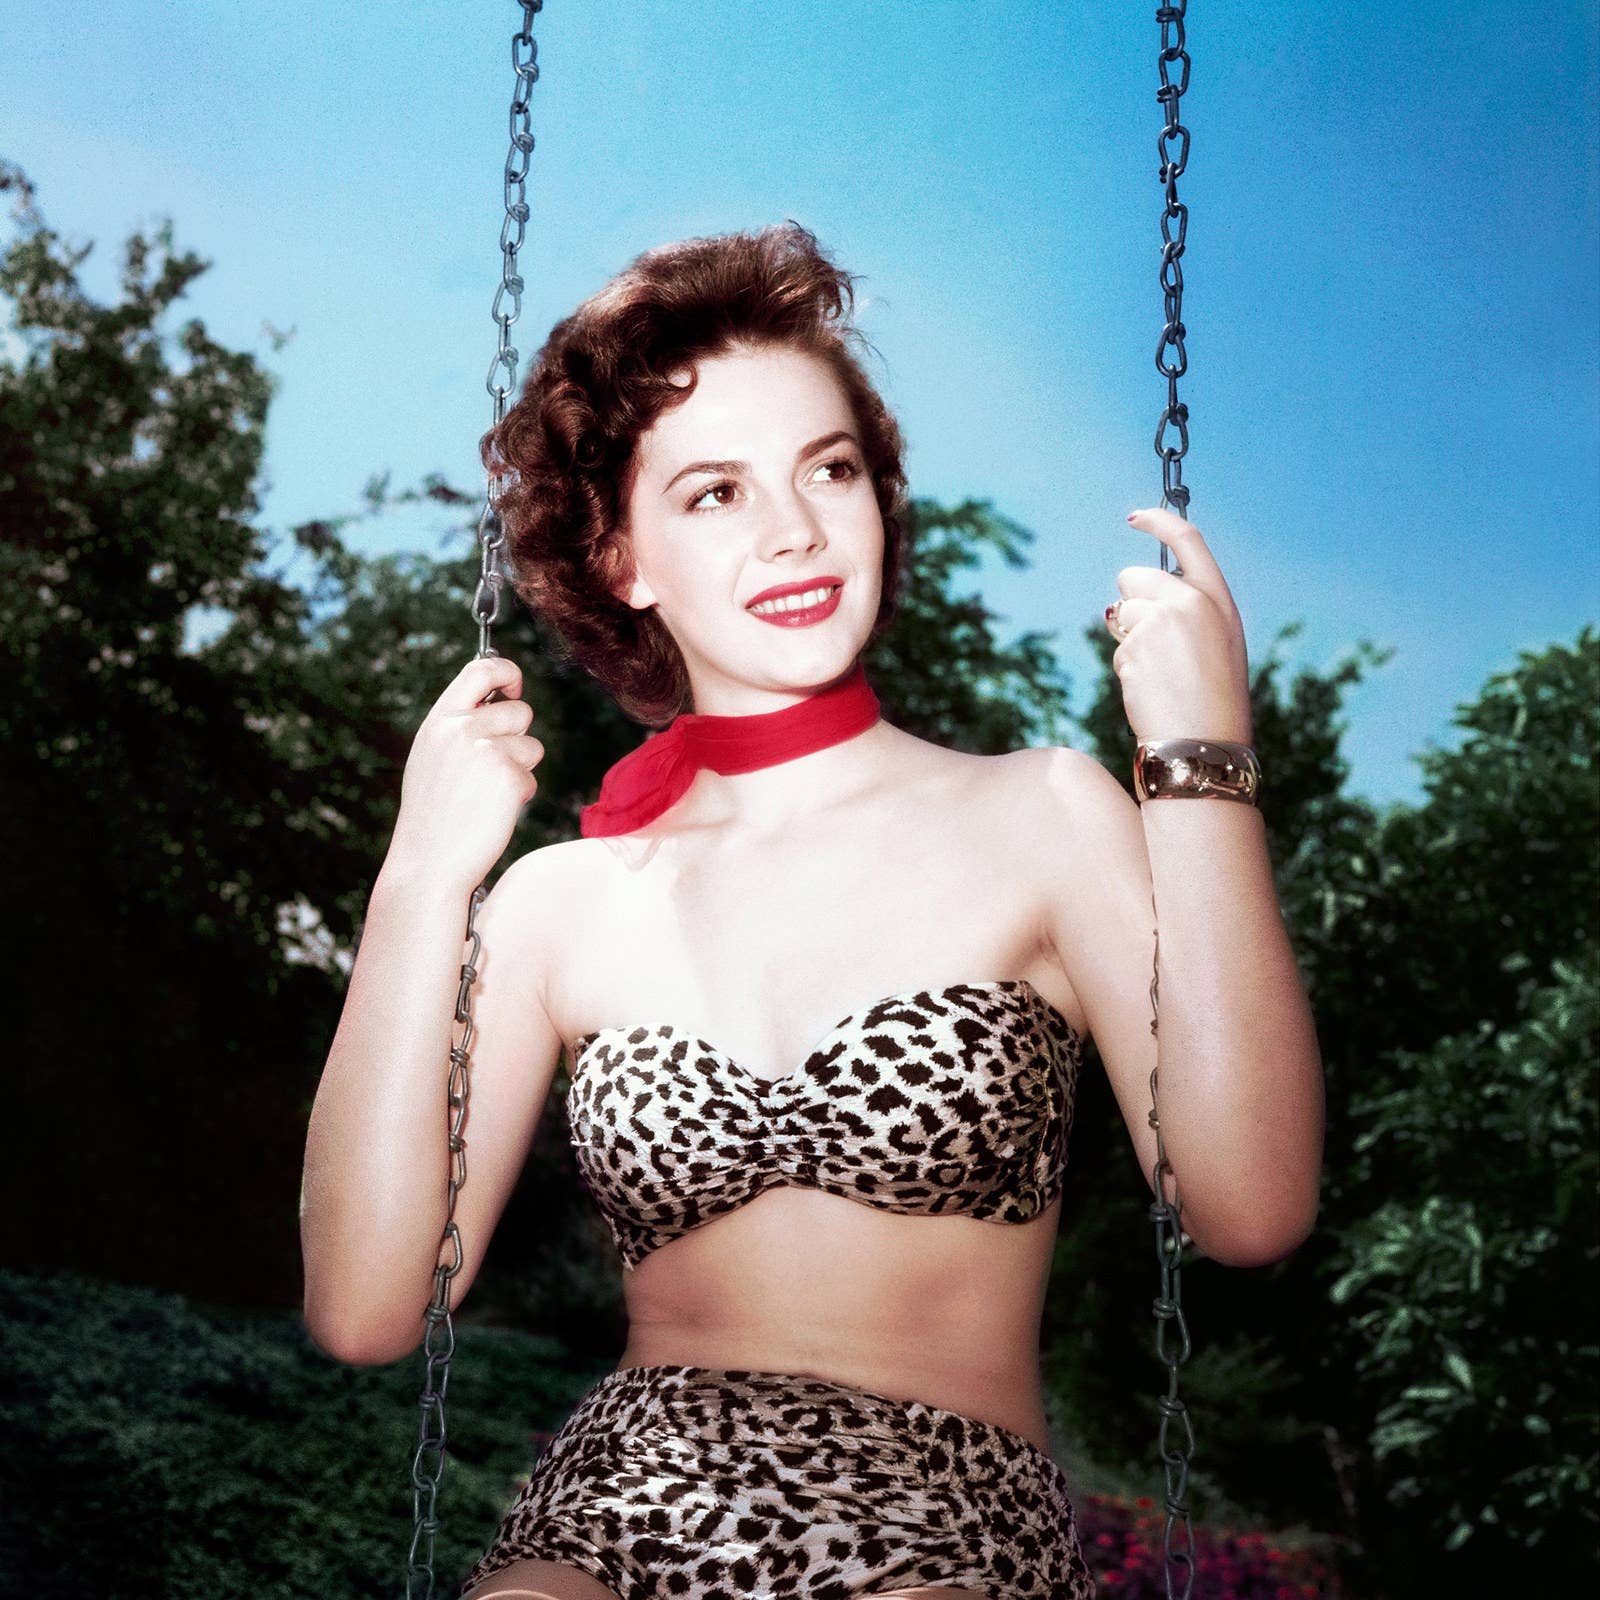 Actor Natalie Wood sits on a swing wearing a leopard-print bikini and a red...